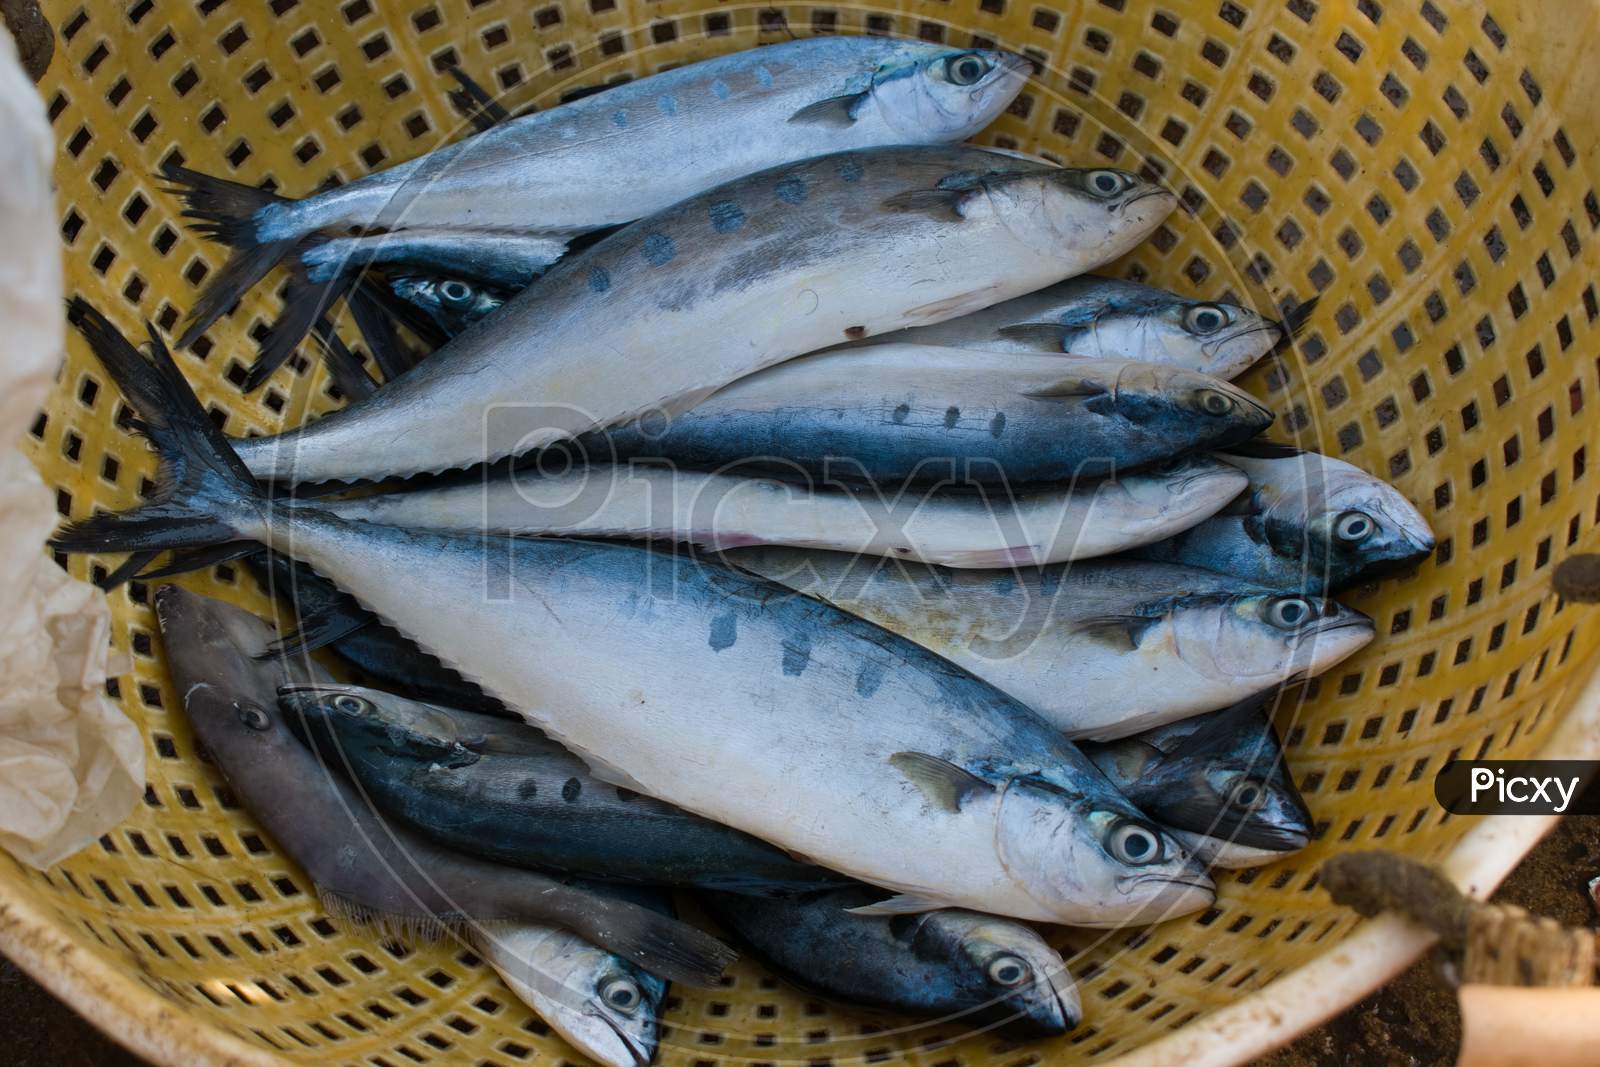 Collection Of Double-Spotted Queenfish Kept On A Container For Sale.